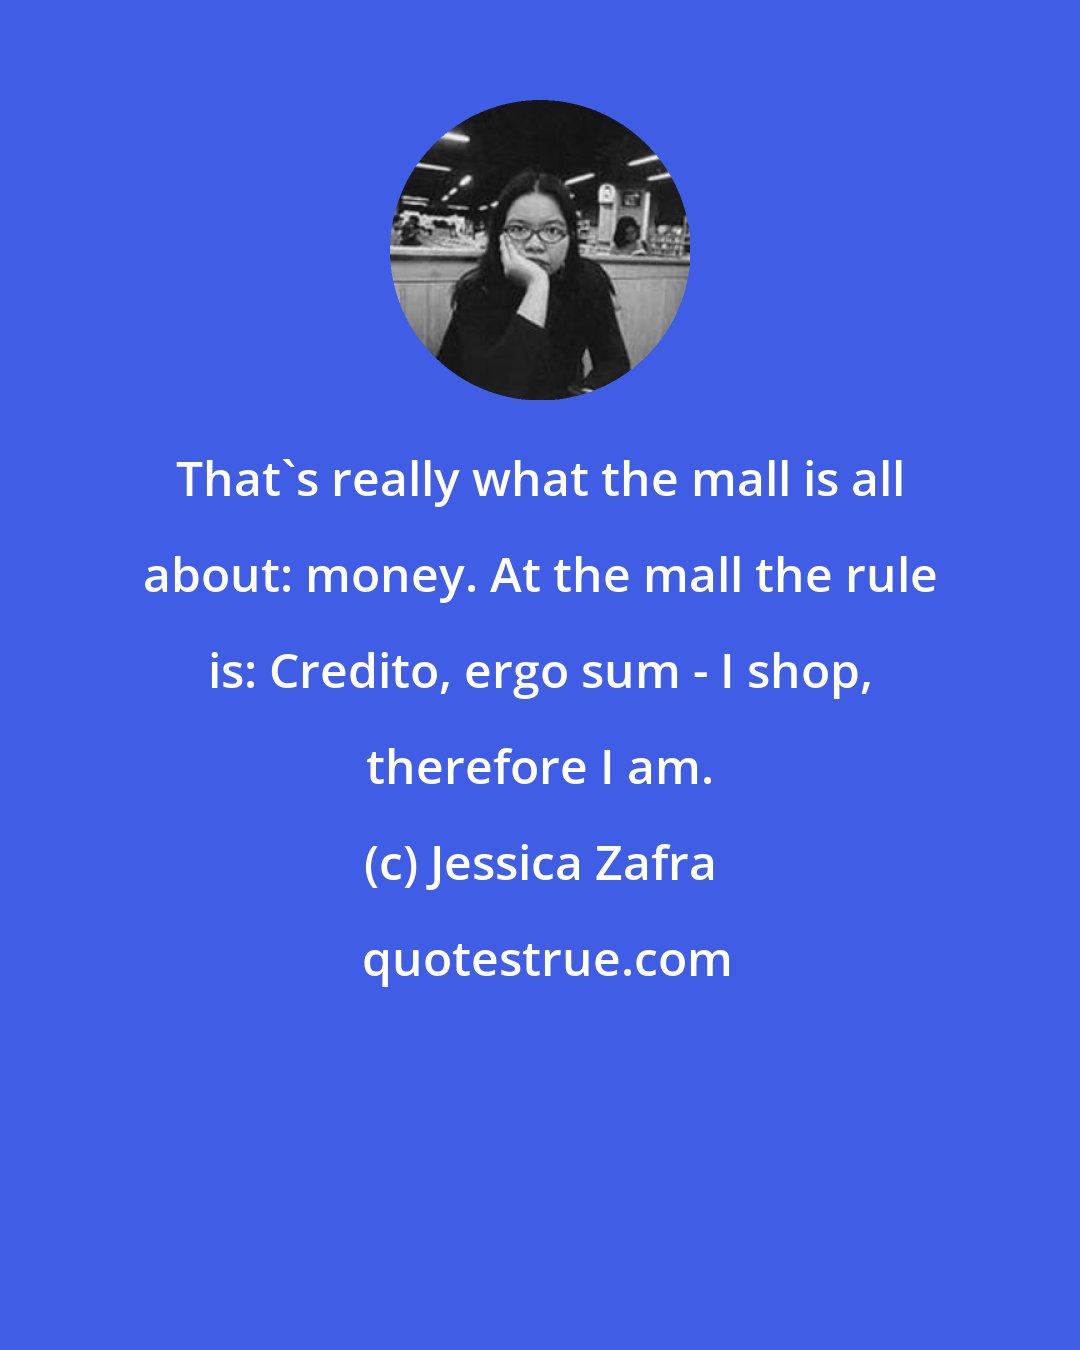 Jessica Zafra: That's really what the mall is all about: money. At the mall the rule is: Credito, ergo sum - I shop, therefore I am.